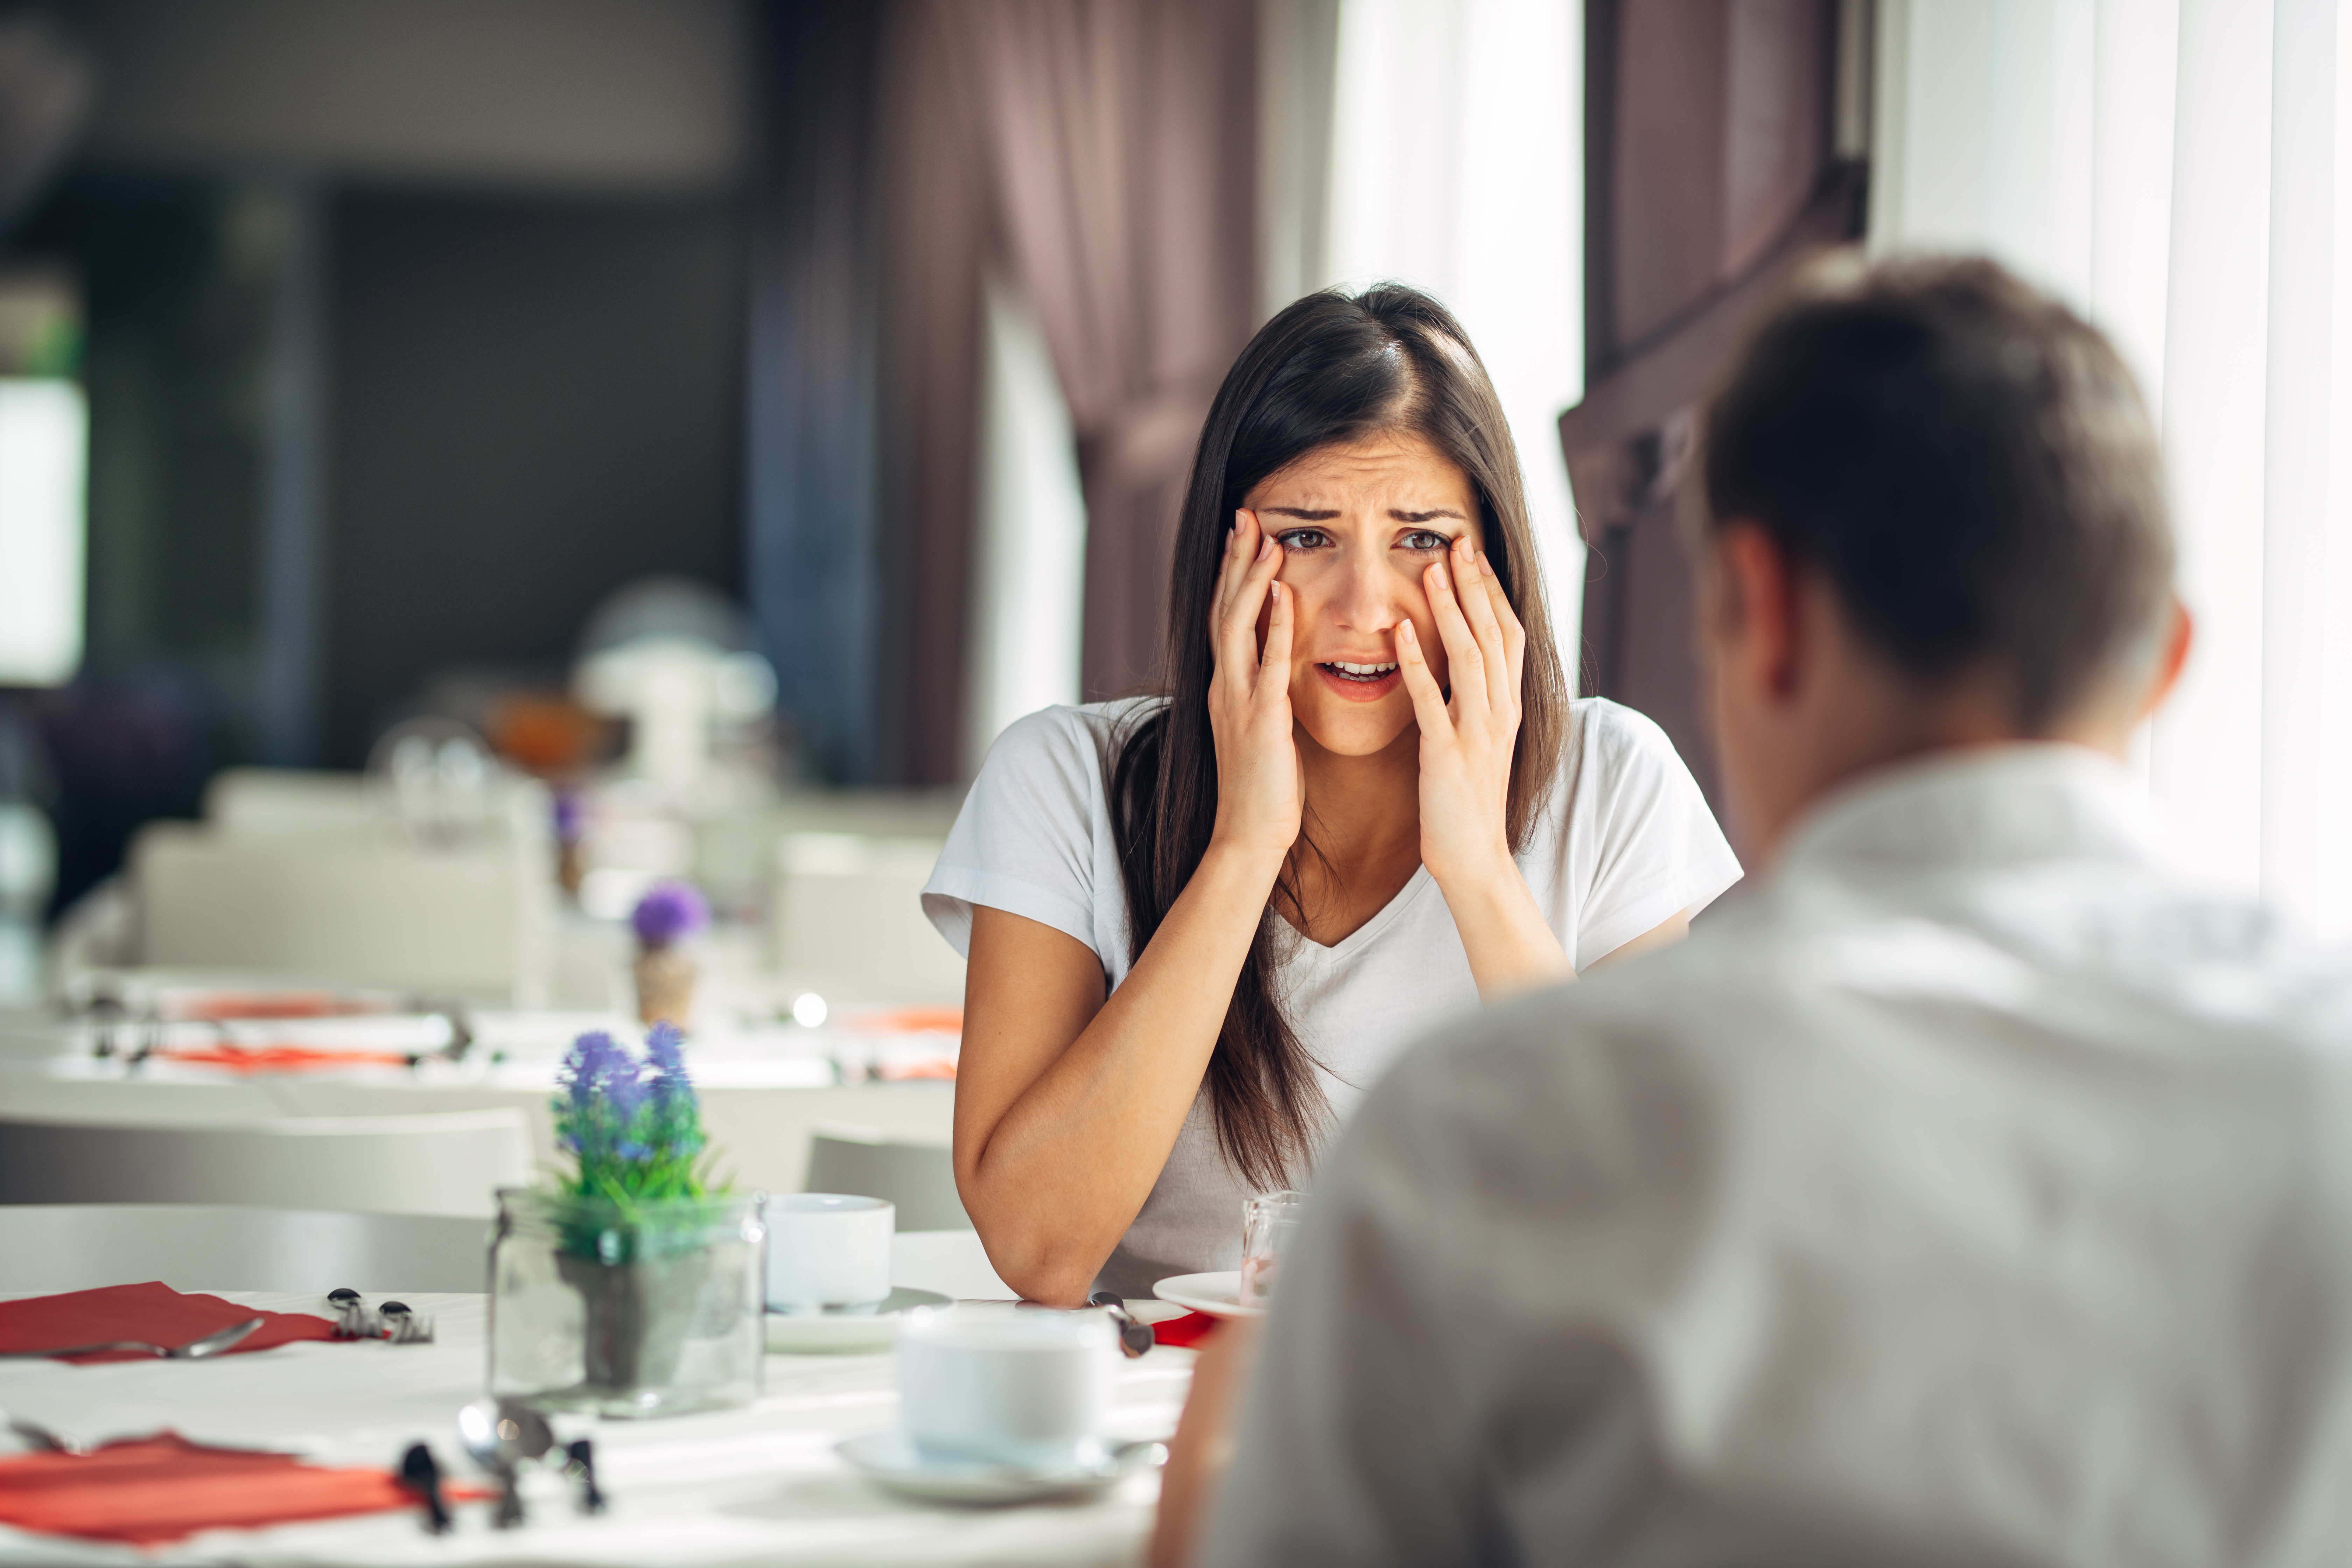 Woman looking surprised while dining with a man | Shutterstock